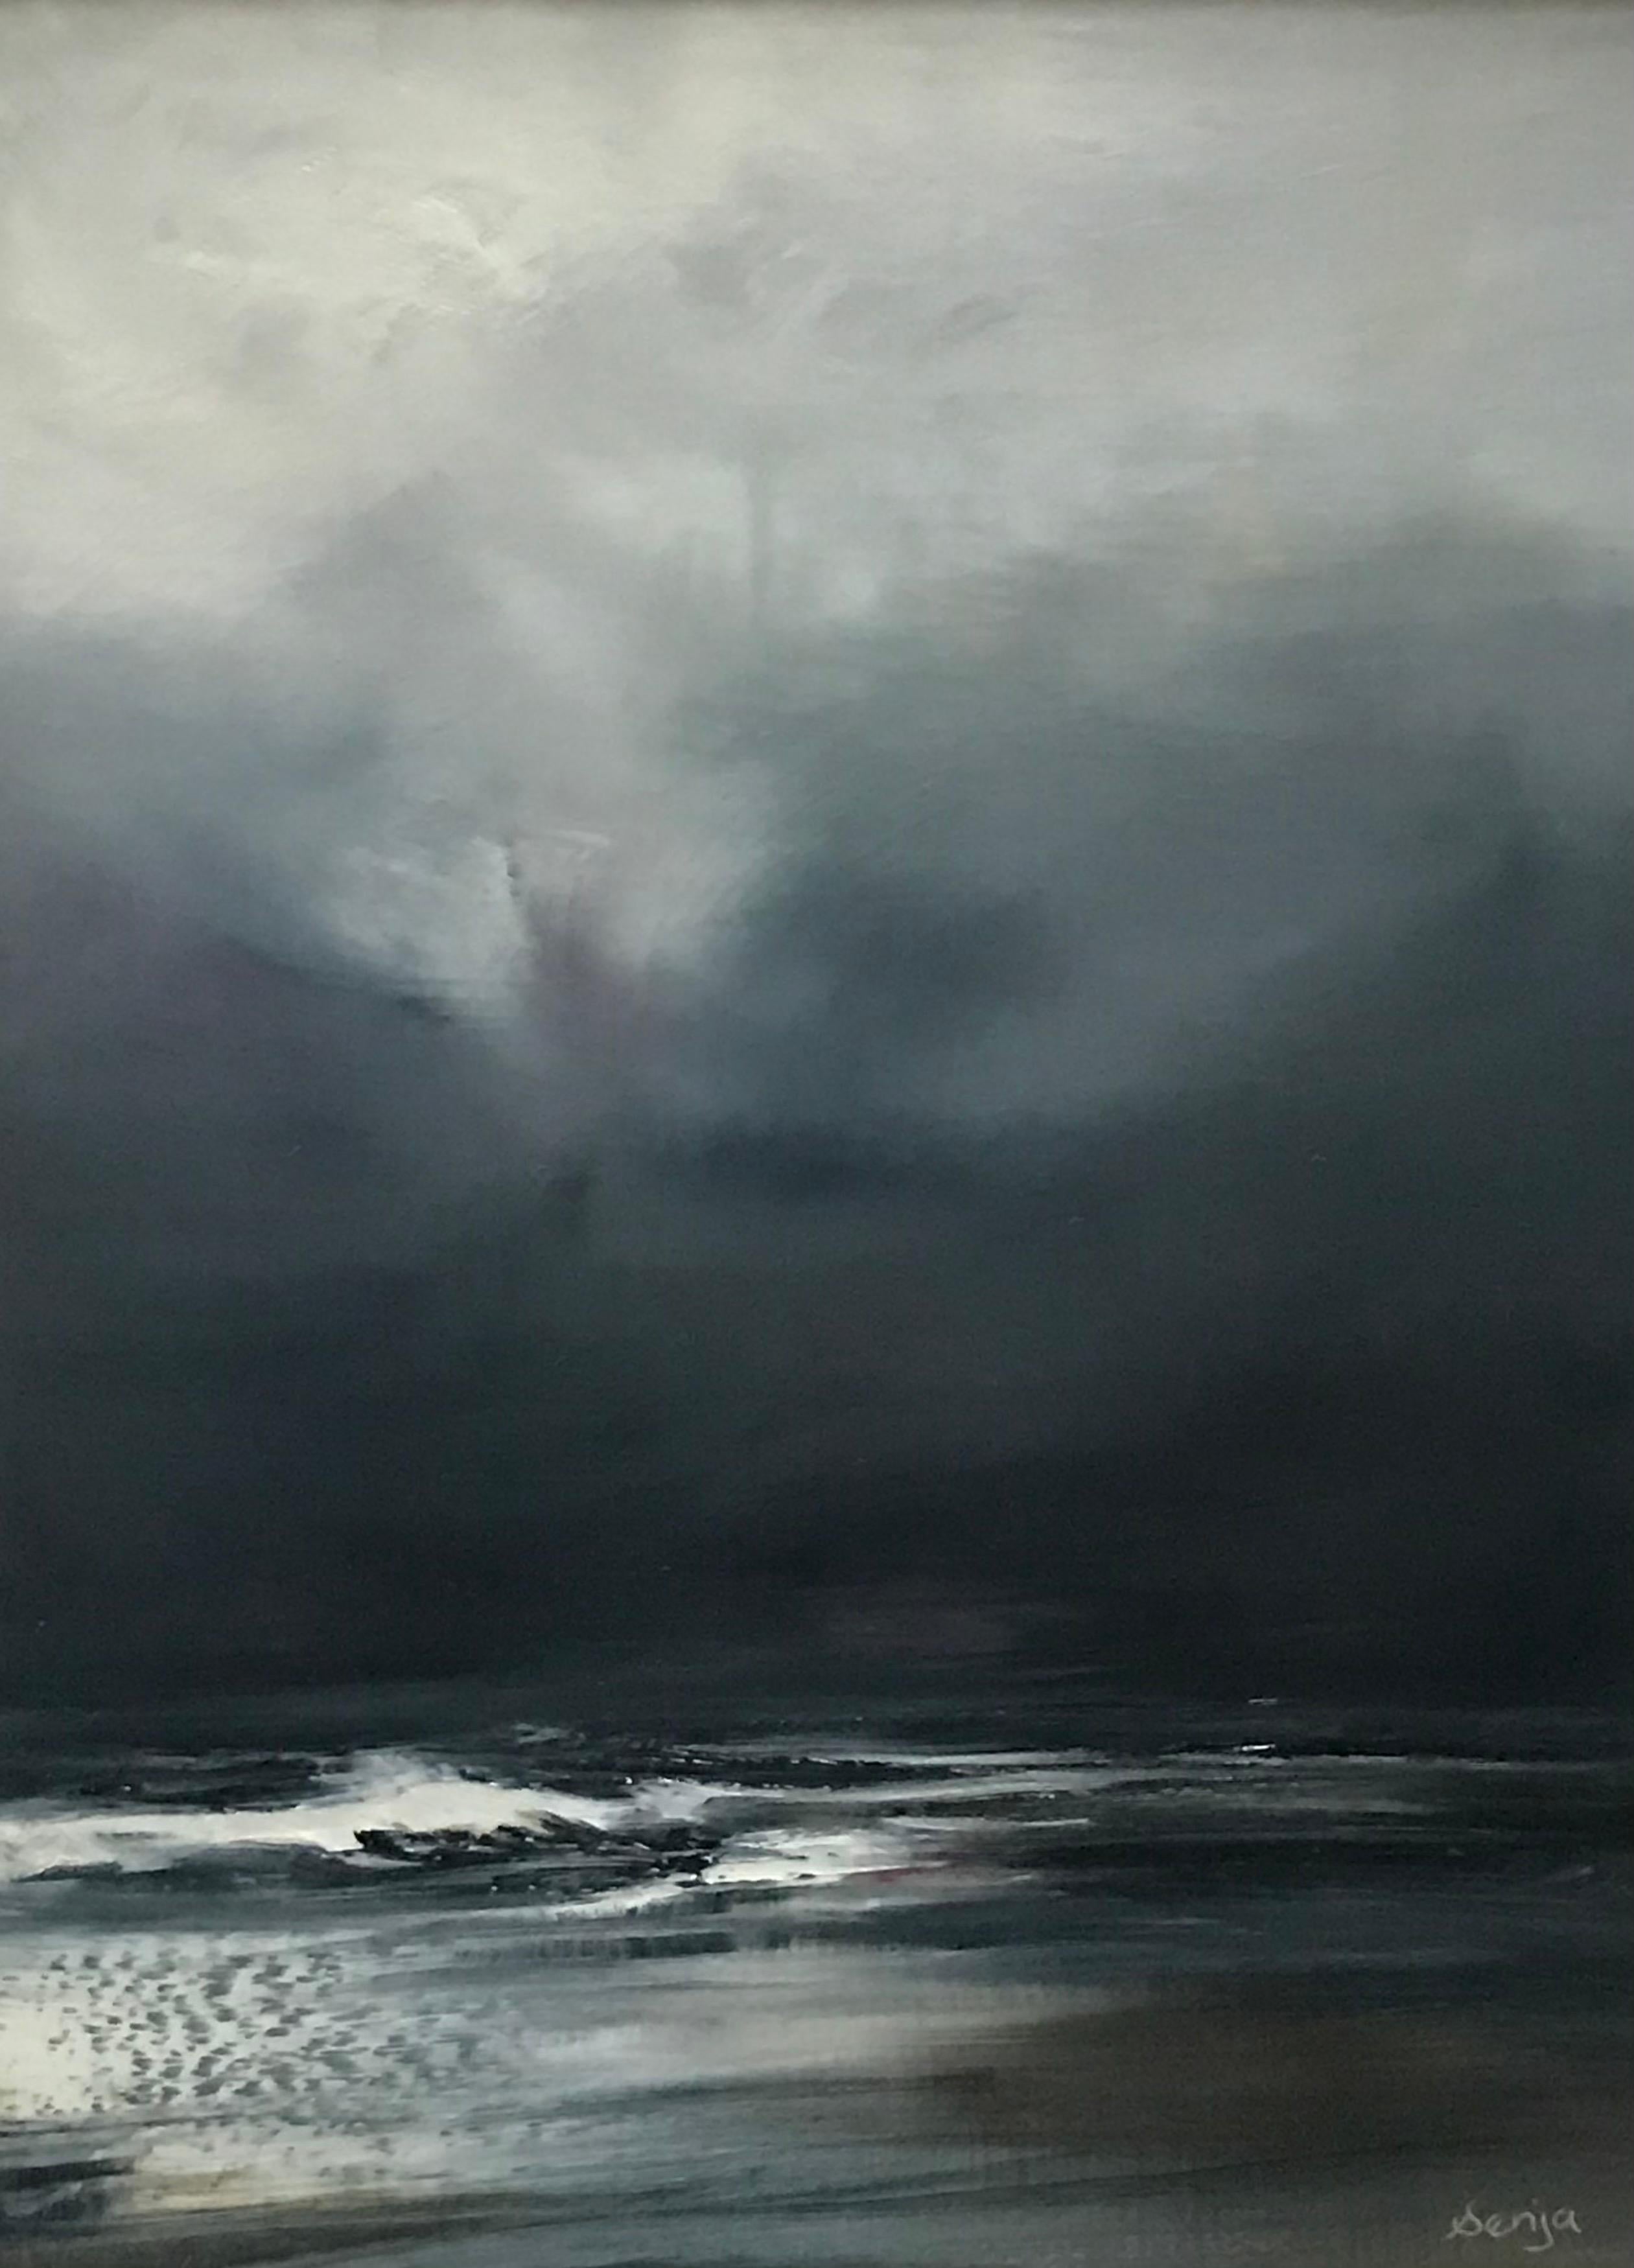 18 x 24cm - image size
28 x 34cm - frame size

Born in Pembrokeshire, Wales, in 1968, Senja Brendon began life by the sea, before moving to the Lake District to grow up surrounded by the breathtaking landscape. Daughter to the outdoor adventure